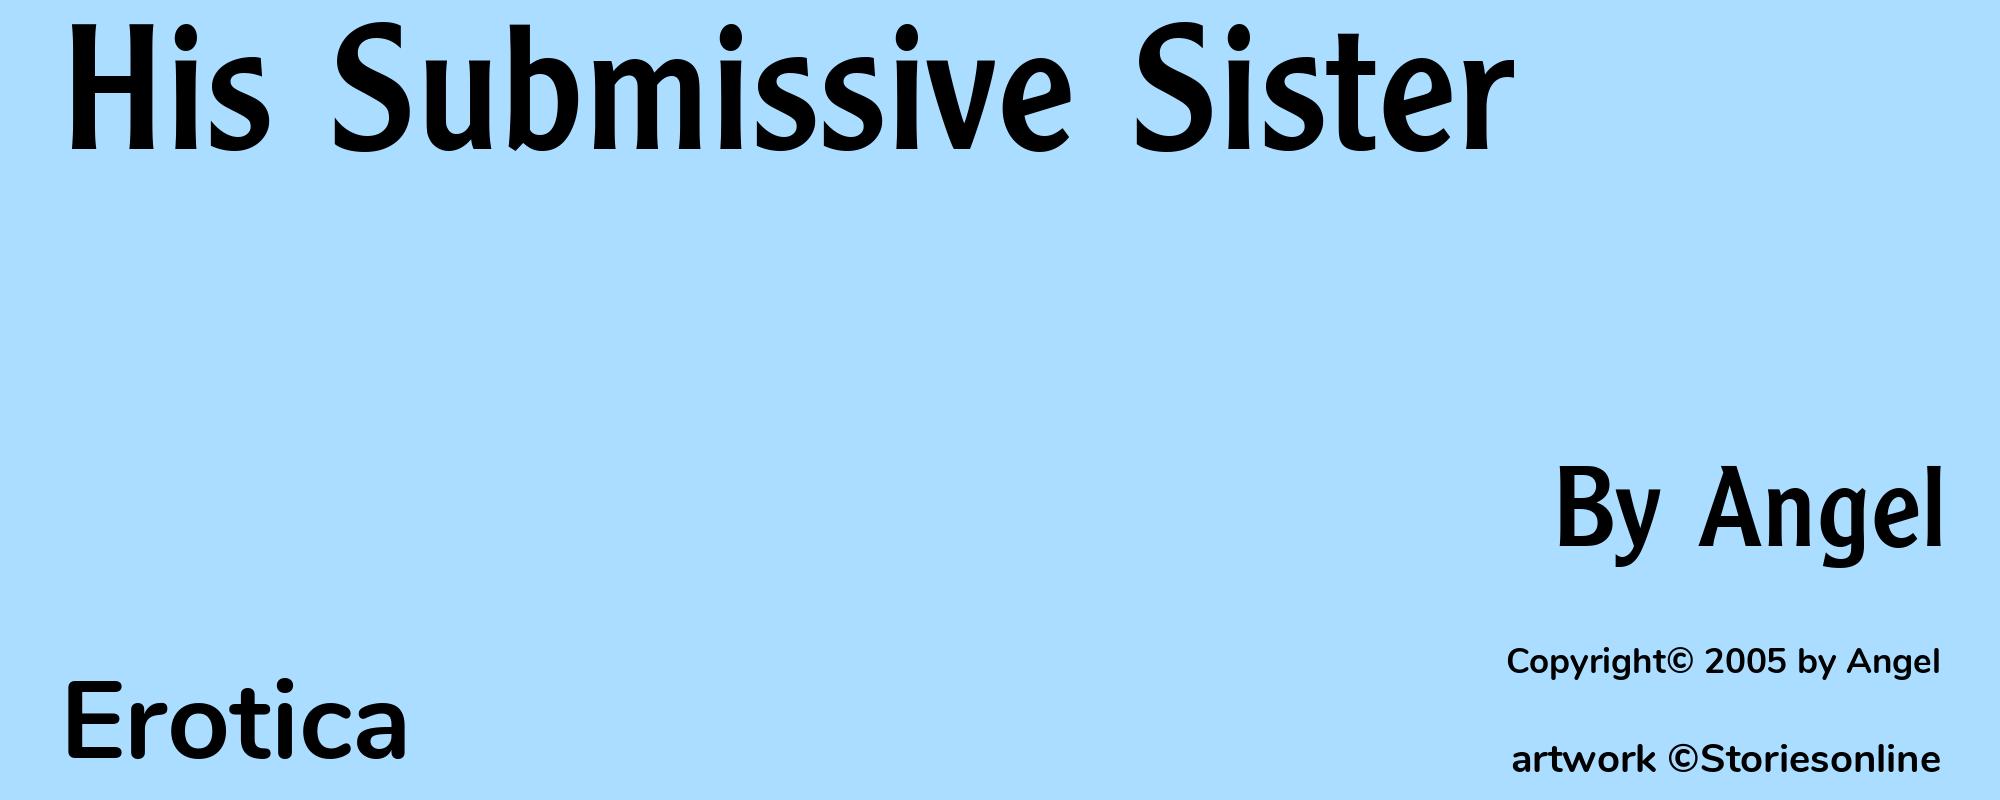 His Submissive Sister - Cover